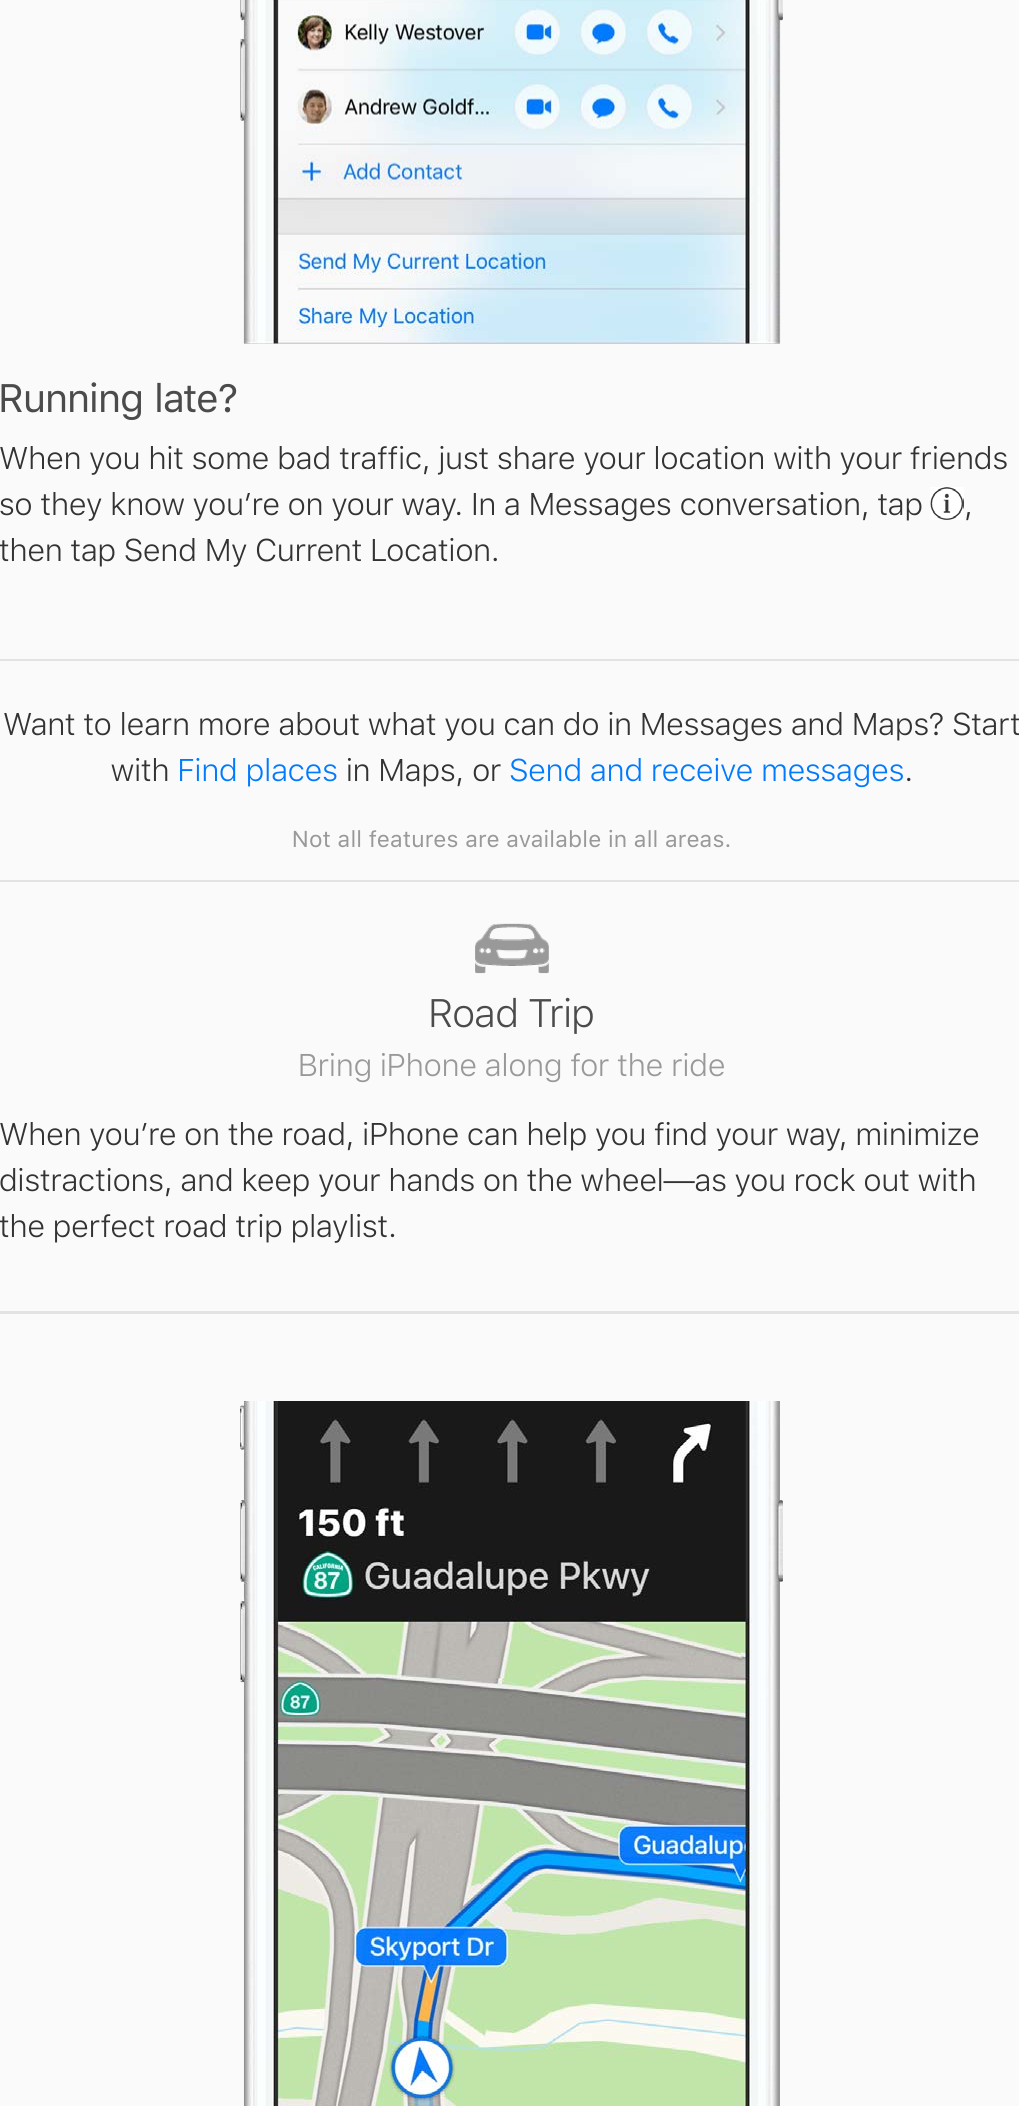 Running late?When you hit some bad traffic, just share your location with your friendsso they know youʼre on your way. In a Messages conversation, tap  ,then tap Send My Current Location.Want to learn more about what you can do in Messages and Maps? Startwith   in Maps, or  .Not all features are available in all areas.Find places Send and receive messagesRoad TripBring iPhone along for the rideWhen youʼre on the road, iPhone can help you find your way, minimizedistractions, and keep your hands on the wheel—as you rock out withthe perfect road trip playlist.